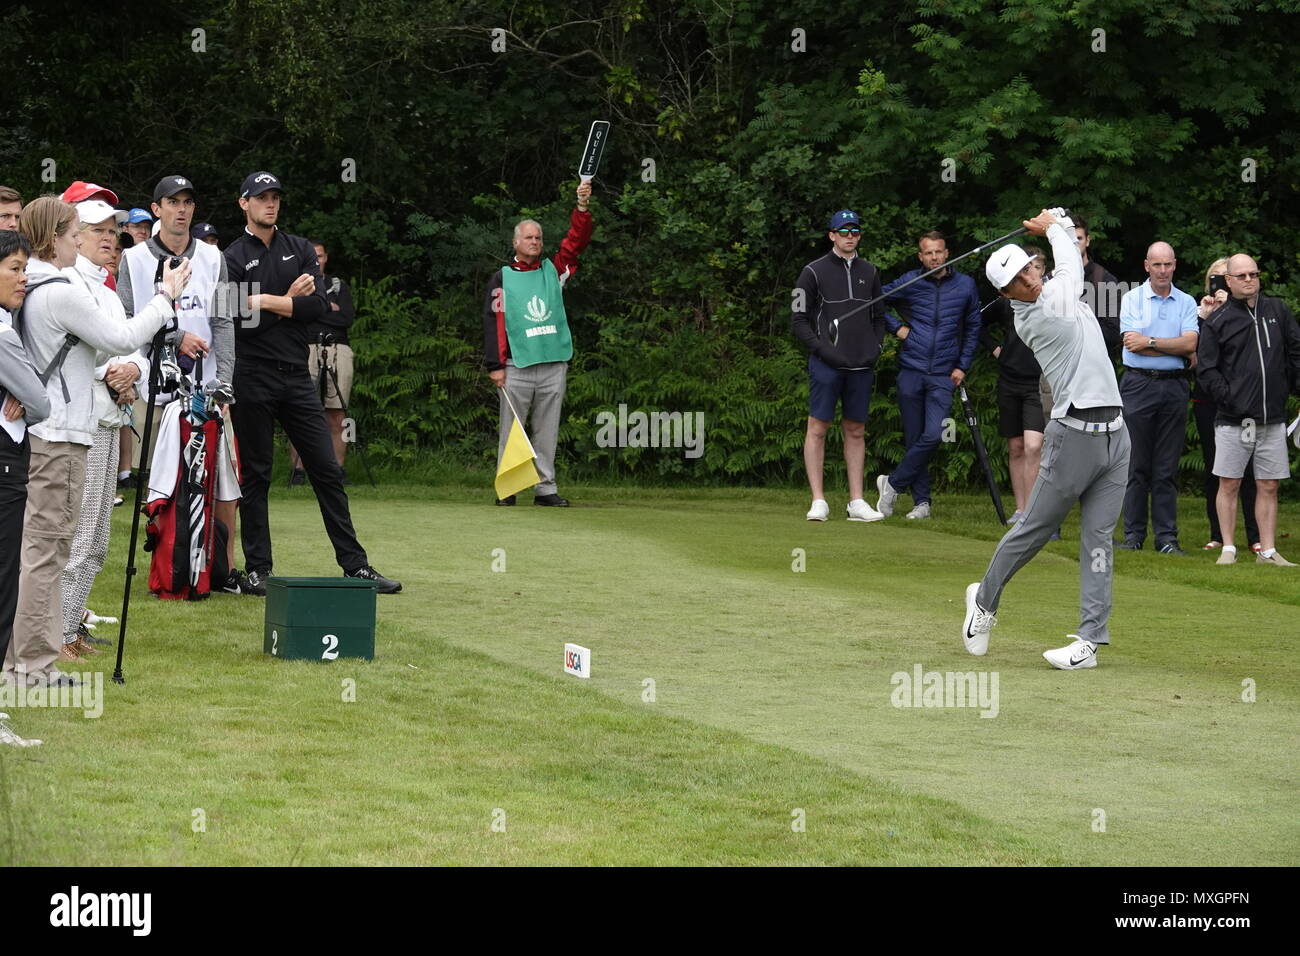 Walton Heath Golf Club, Surrey, UK 4th June 2018  Thorbjorn Olsen (Denmark) fresh from winning The Italian open and  $1million yesterday tees it up at US Open Golf Championship sectional qualifying for the 2018 US Open to be played at Shinnecock Hills, Long Island, New York, USA in two weeks time. Credit: Motofoto/Alamy Live News Stock Photo